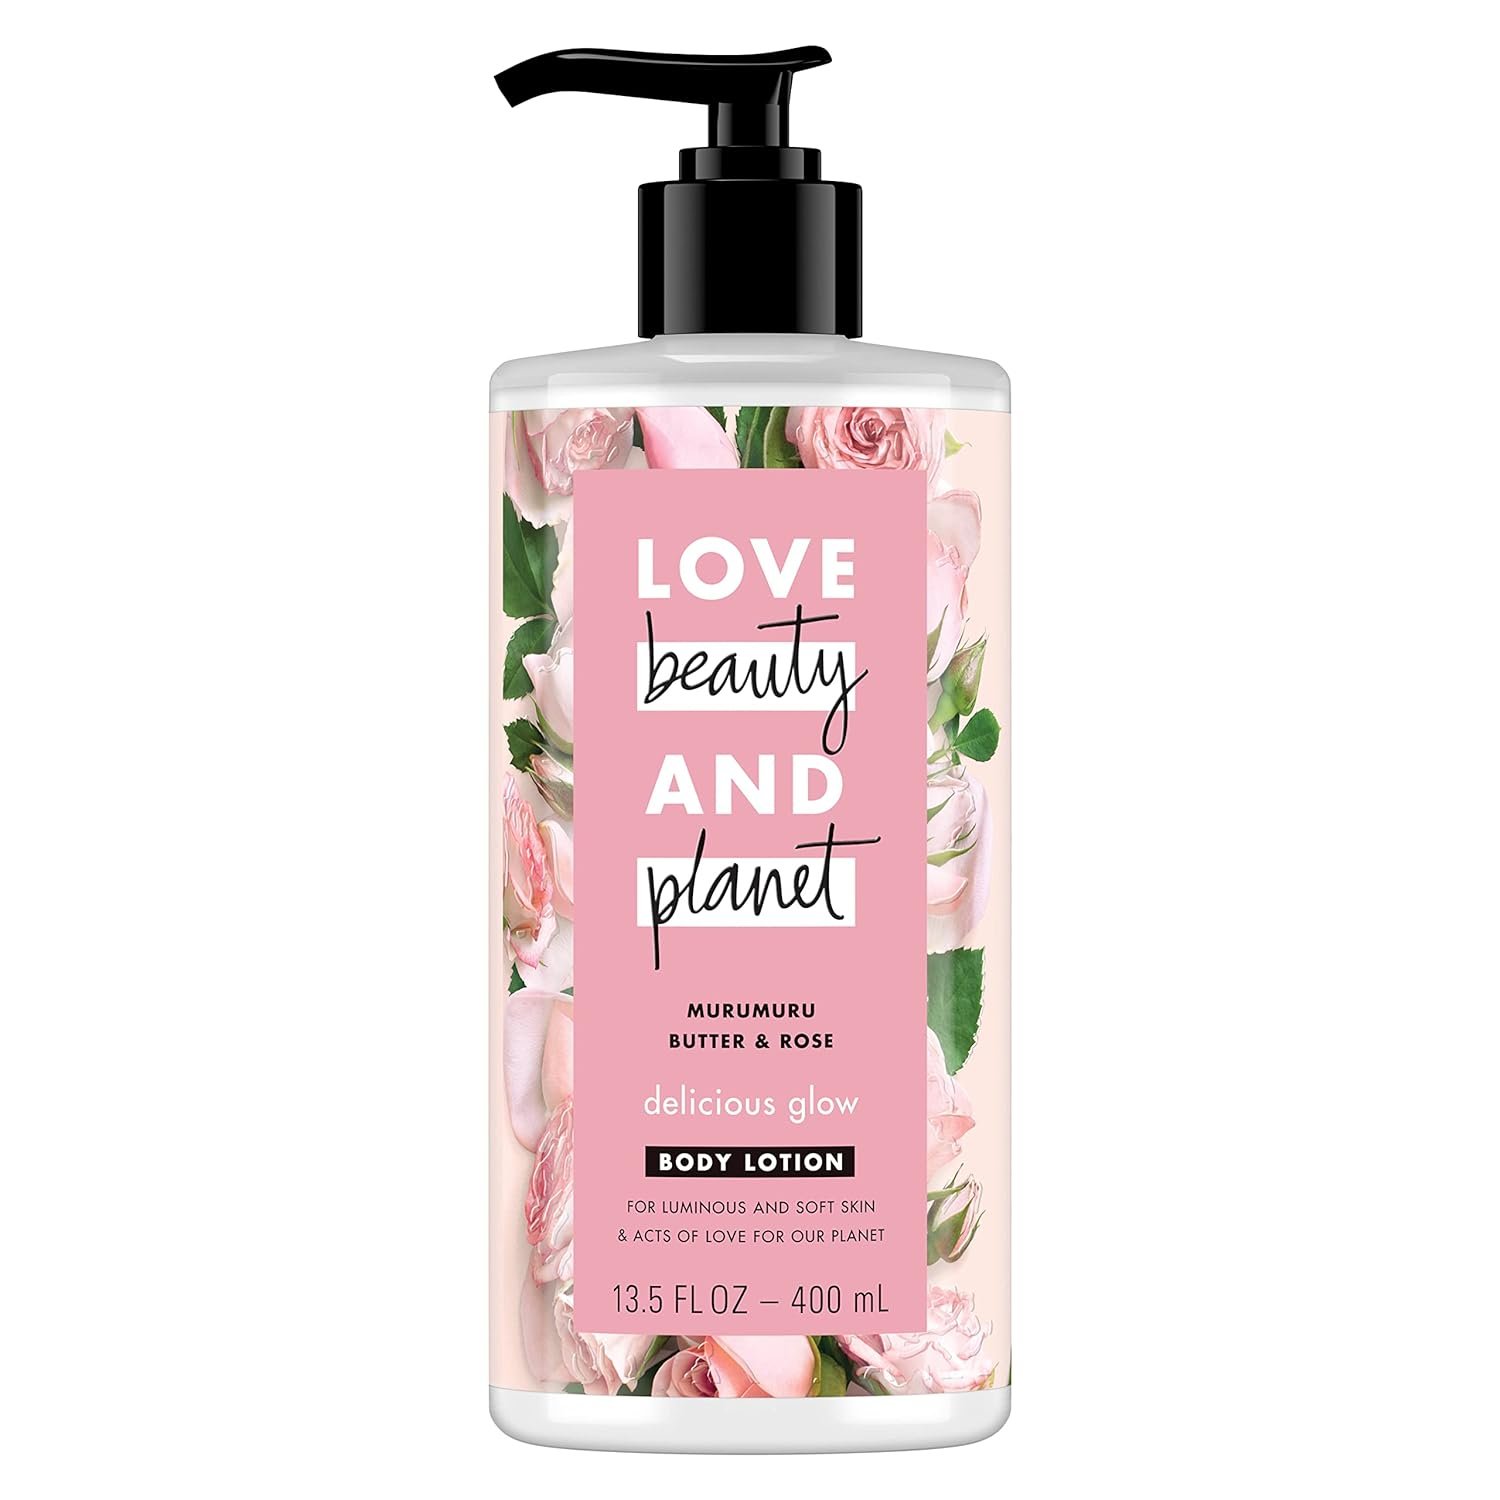 Love Beauty and Planet Delicious Glow Body Lotion for Soft, Glowing Skin Murumuru Butter  Rose Natural Ingredients, Plant-Based Moisturizers, Vegan, Cruelty-Free 13.5 oz